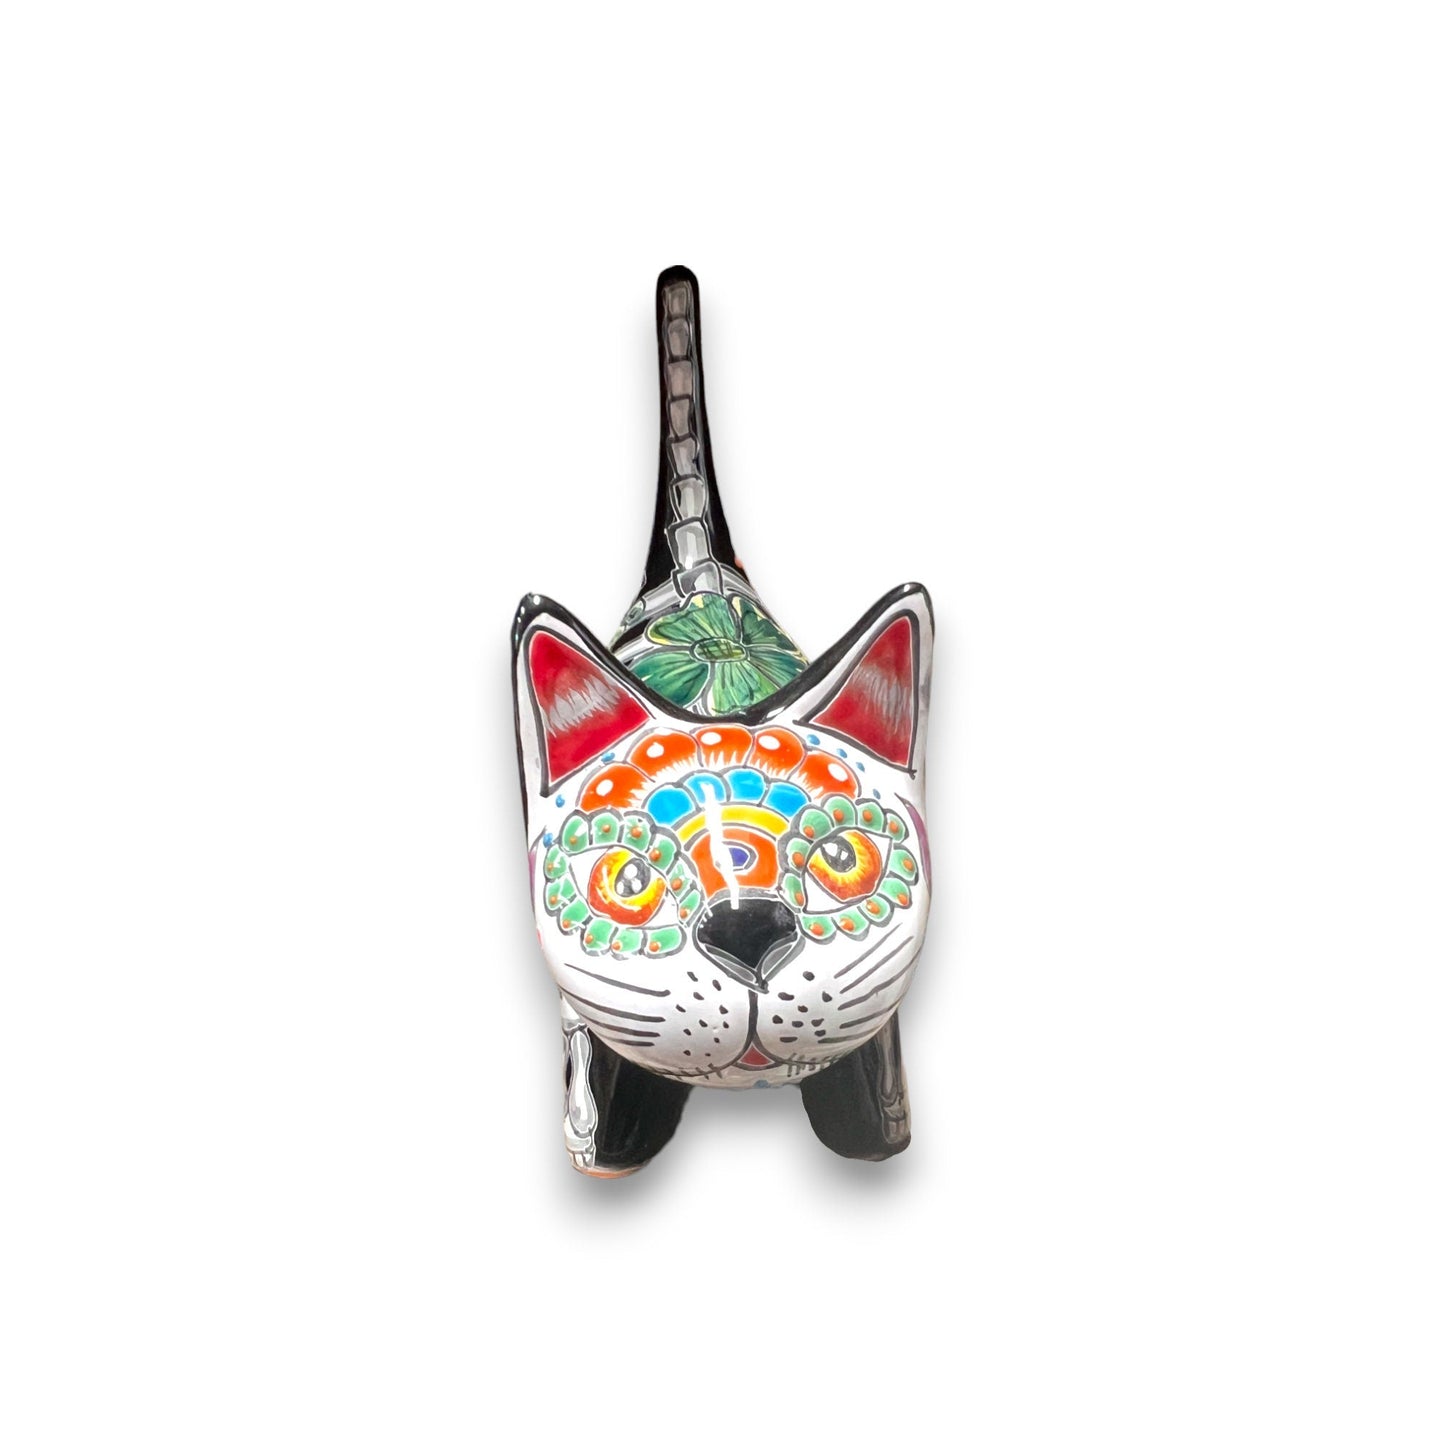 Vibrant Talavera Cat Statue | Day of the Dead Decor | Hand-Painted Mexican Art (Small)